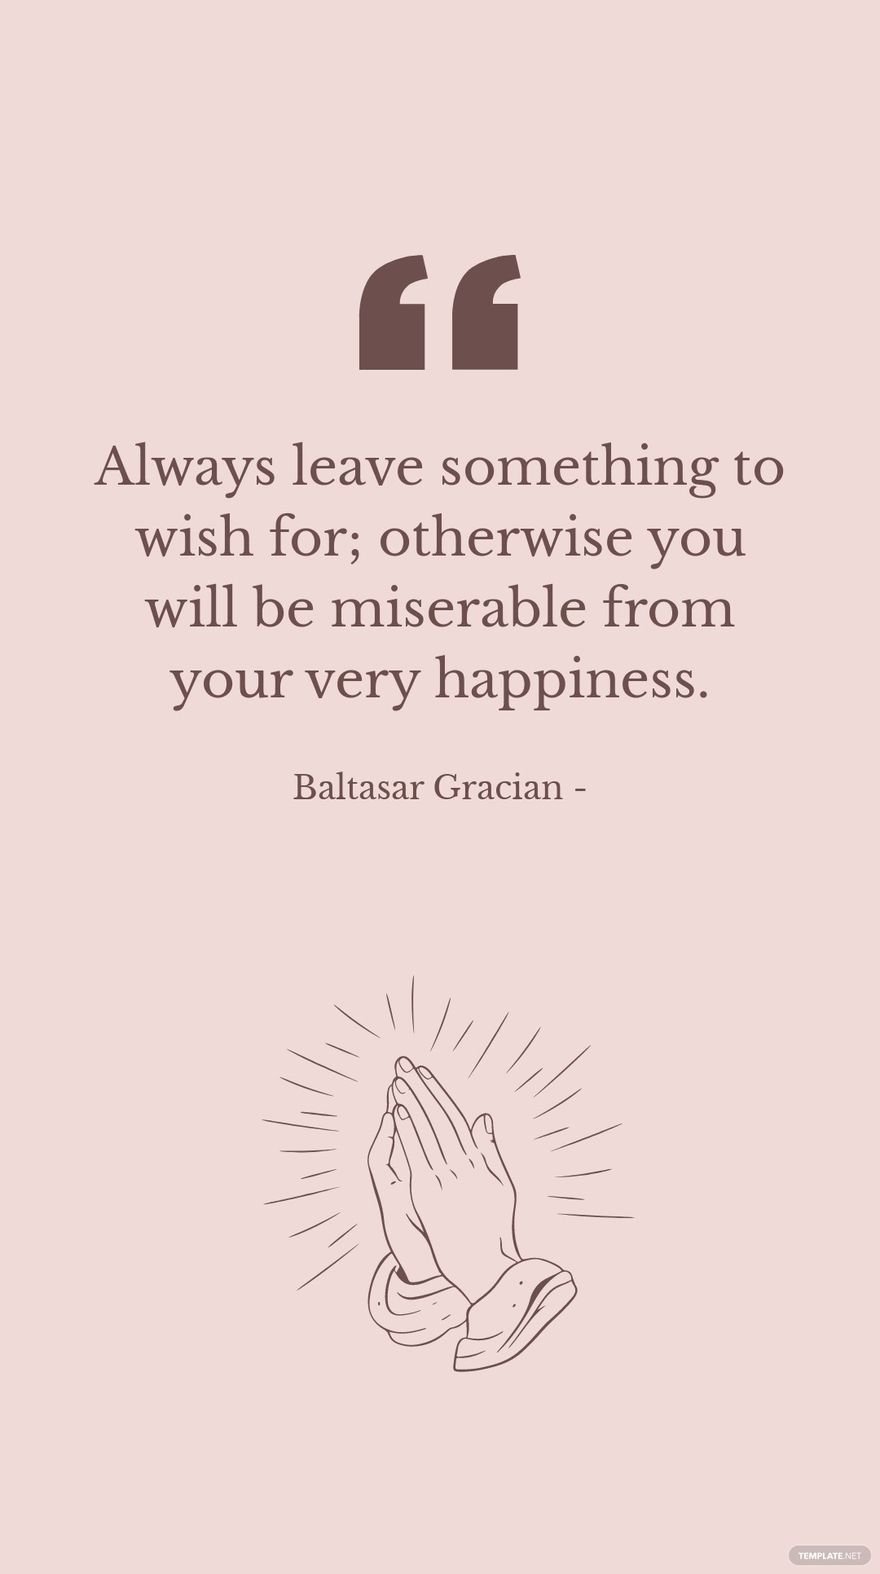 Baltasar Gracian - Always leave something to wish for; otherwise you will be miserable from your very happiness.